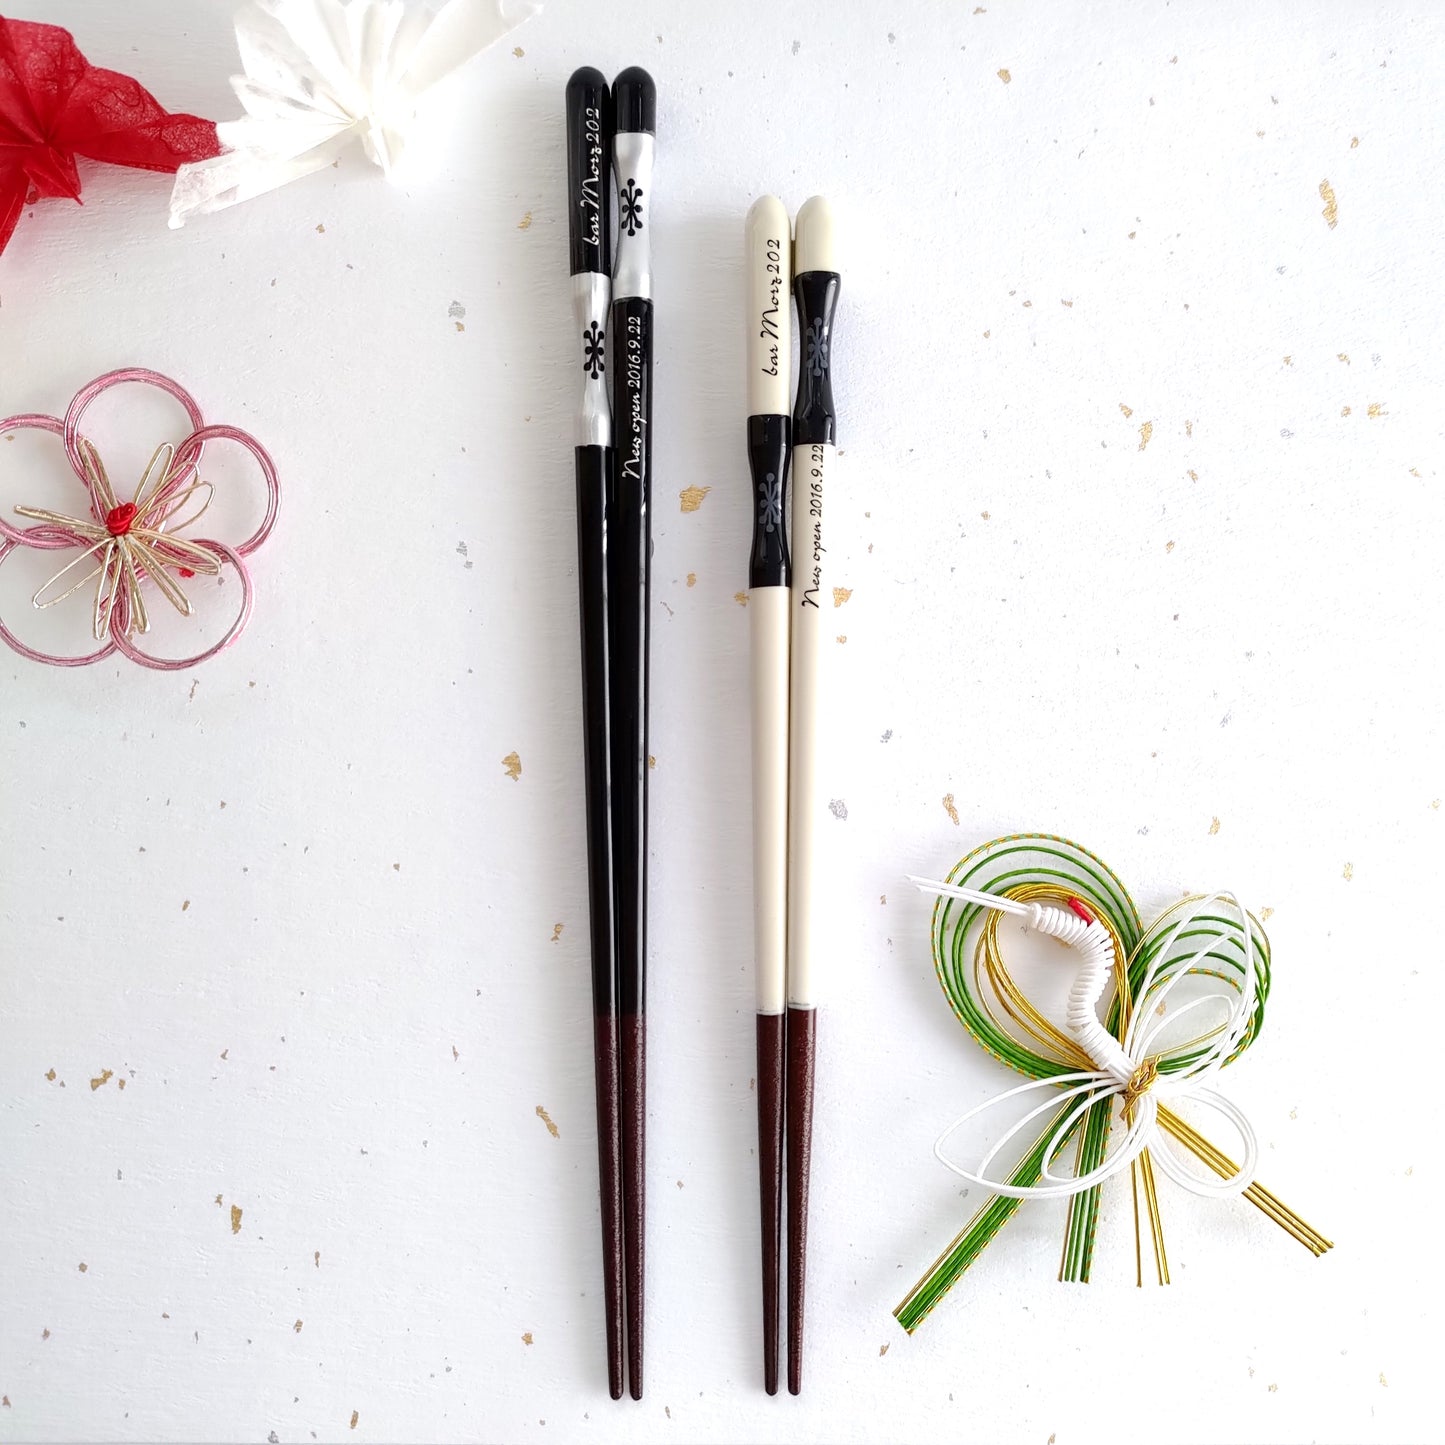 Heart of the forest Japanese chopsticks black white - DOUBLE PAIR